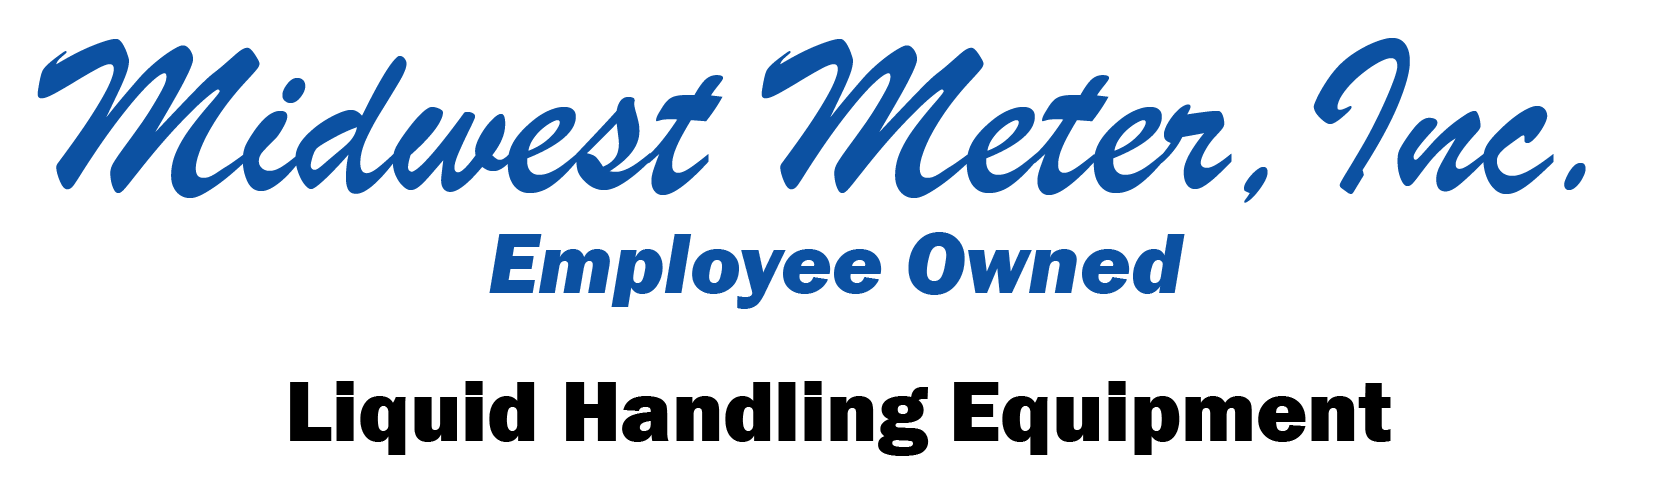 Midwest Meter Logo and misson stating Liquid Handling Equipment